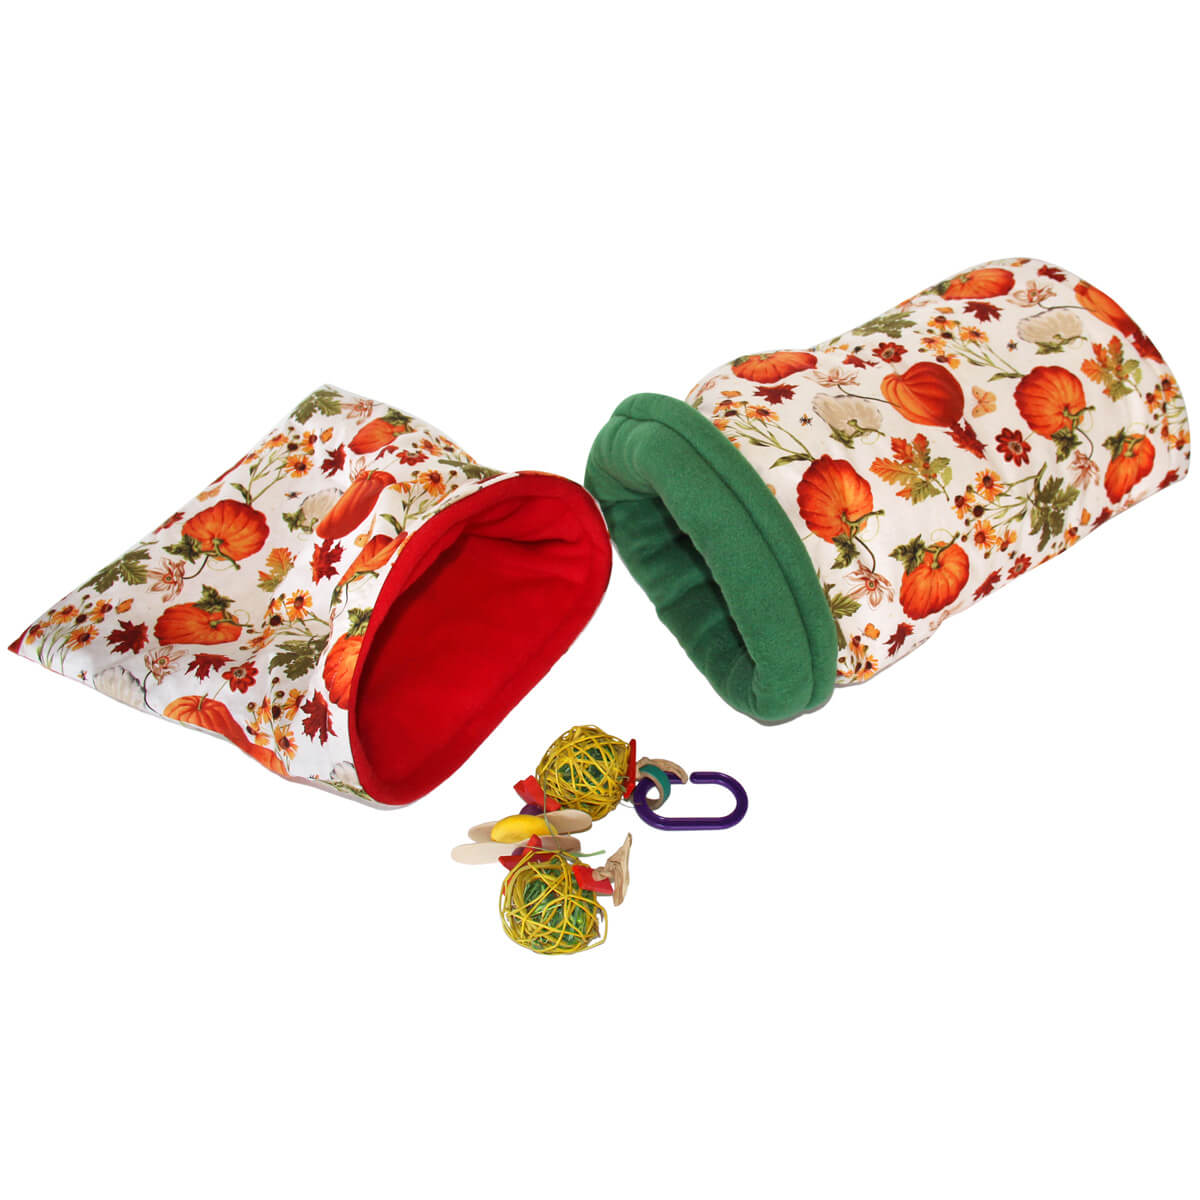 Small Pumpkin Harvest Bed and Toy Bundle for Guinea Pigs and Other Small Animals